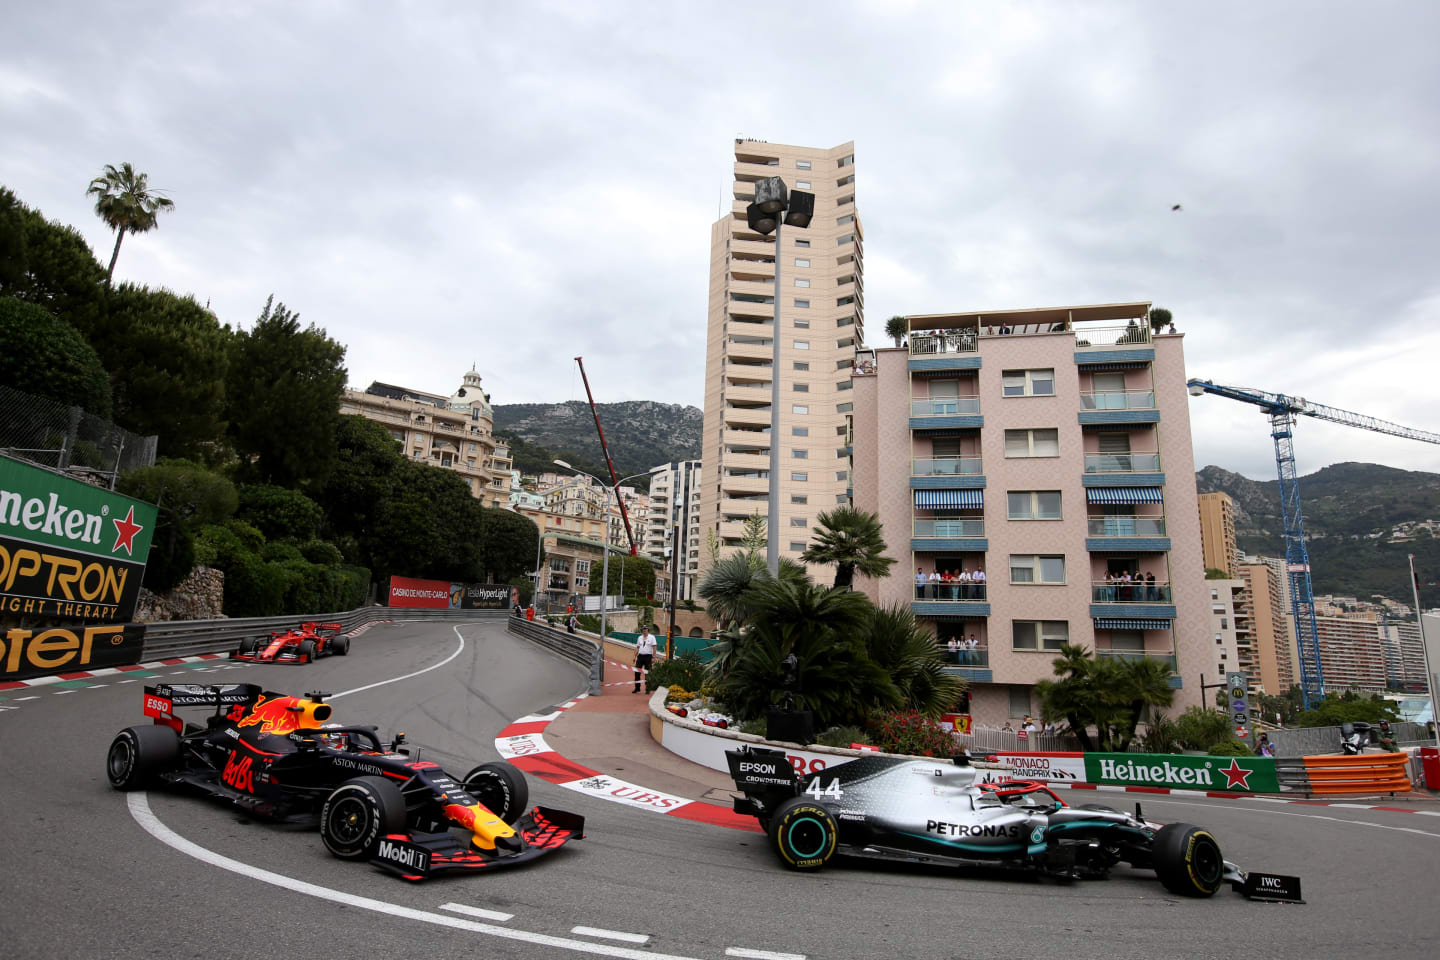 MONTE-CARLO, MONACO - MAY 26: Lewis Hamilton of Great Britain driving the (44) Mercedes AMG